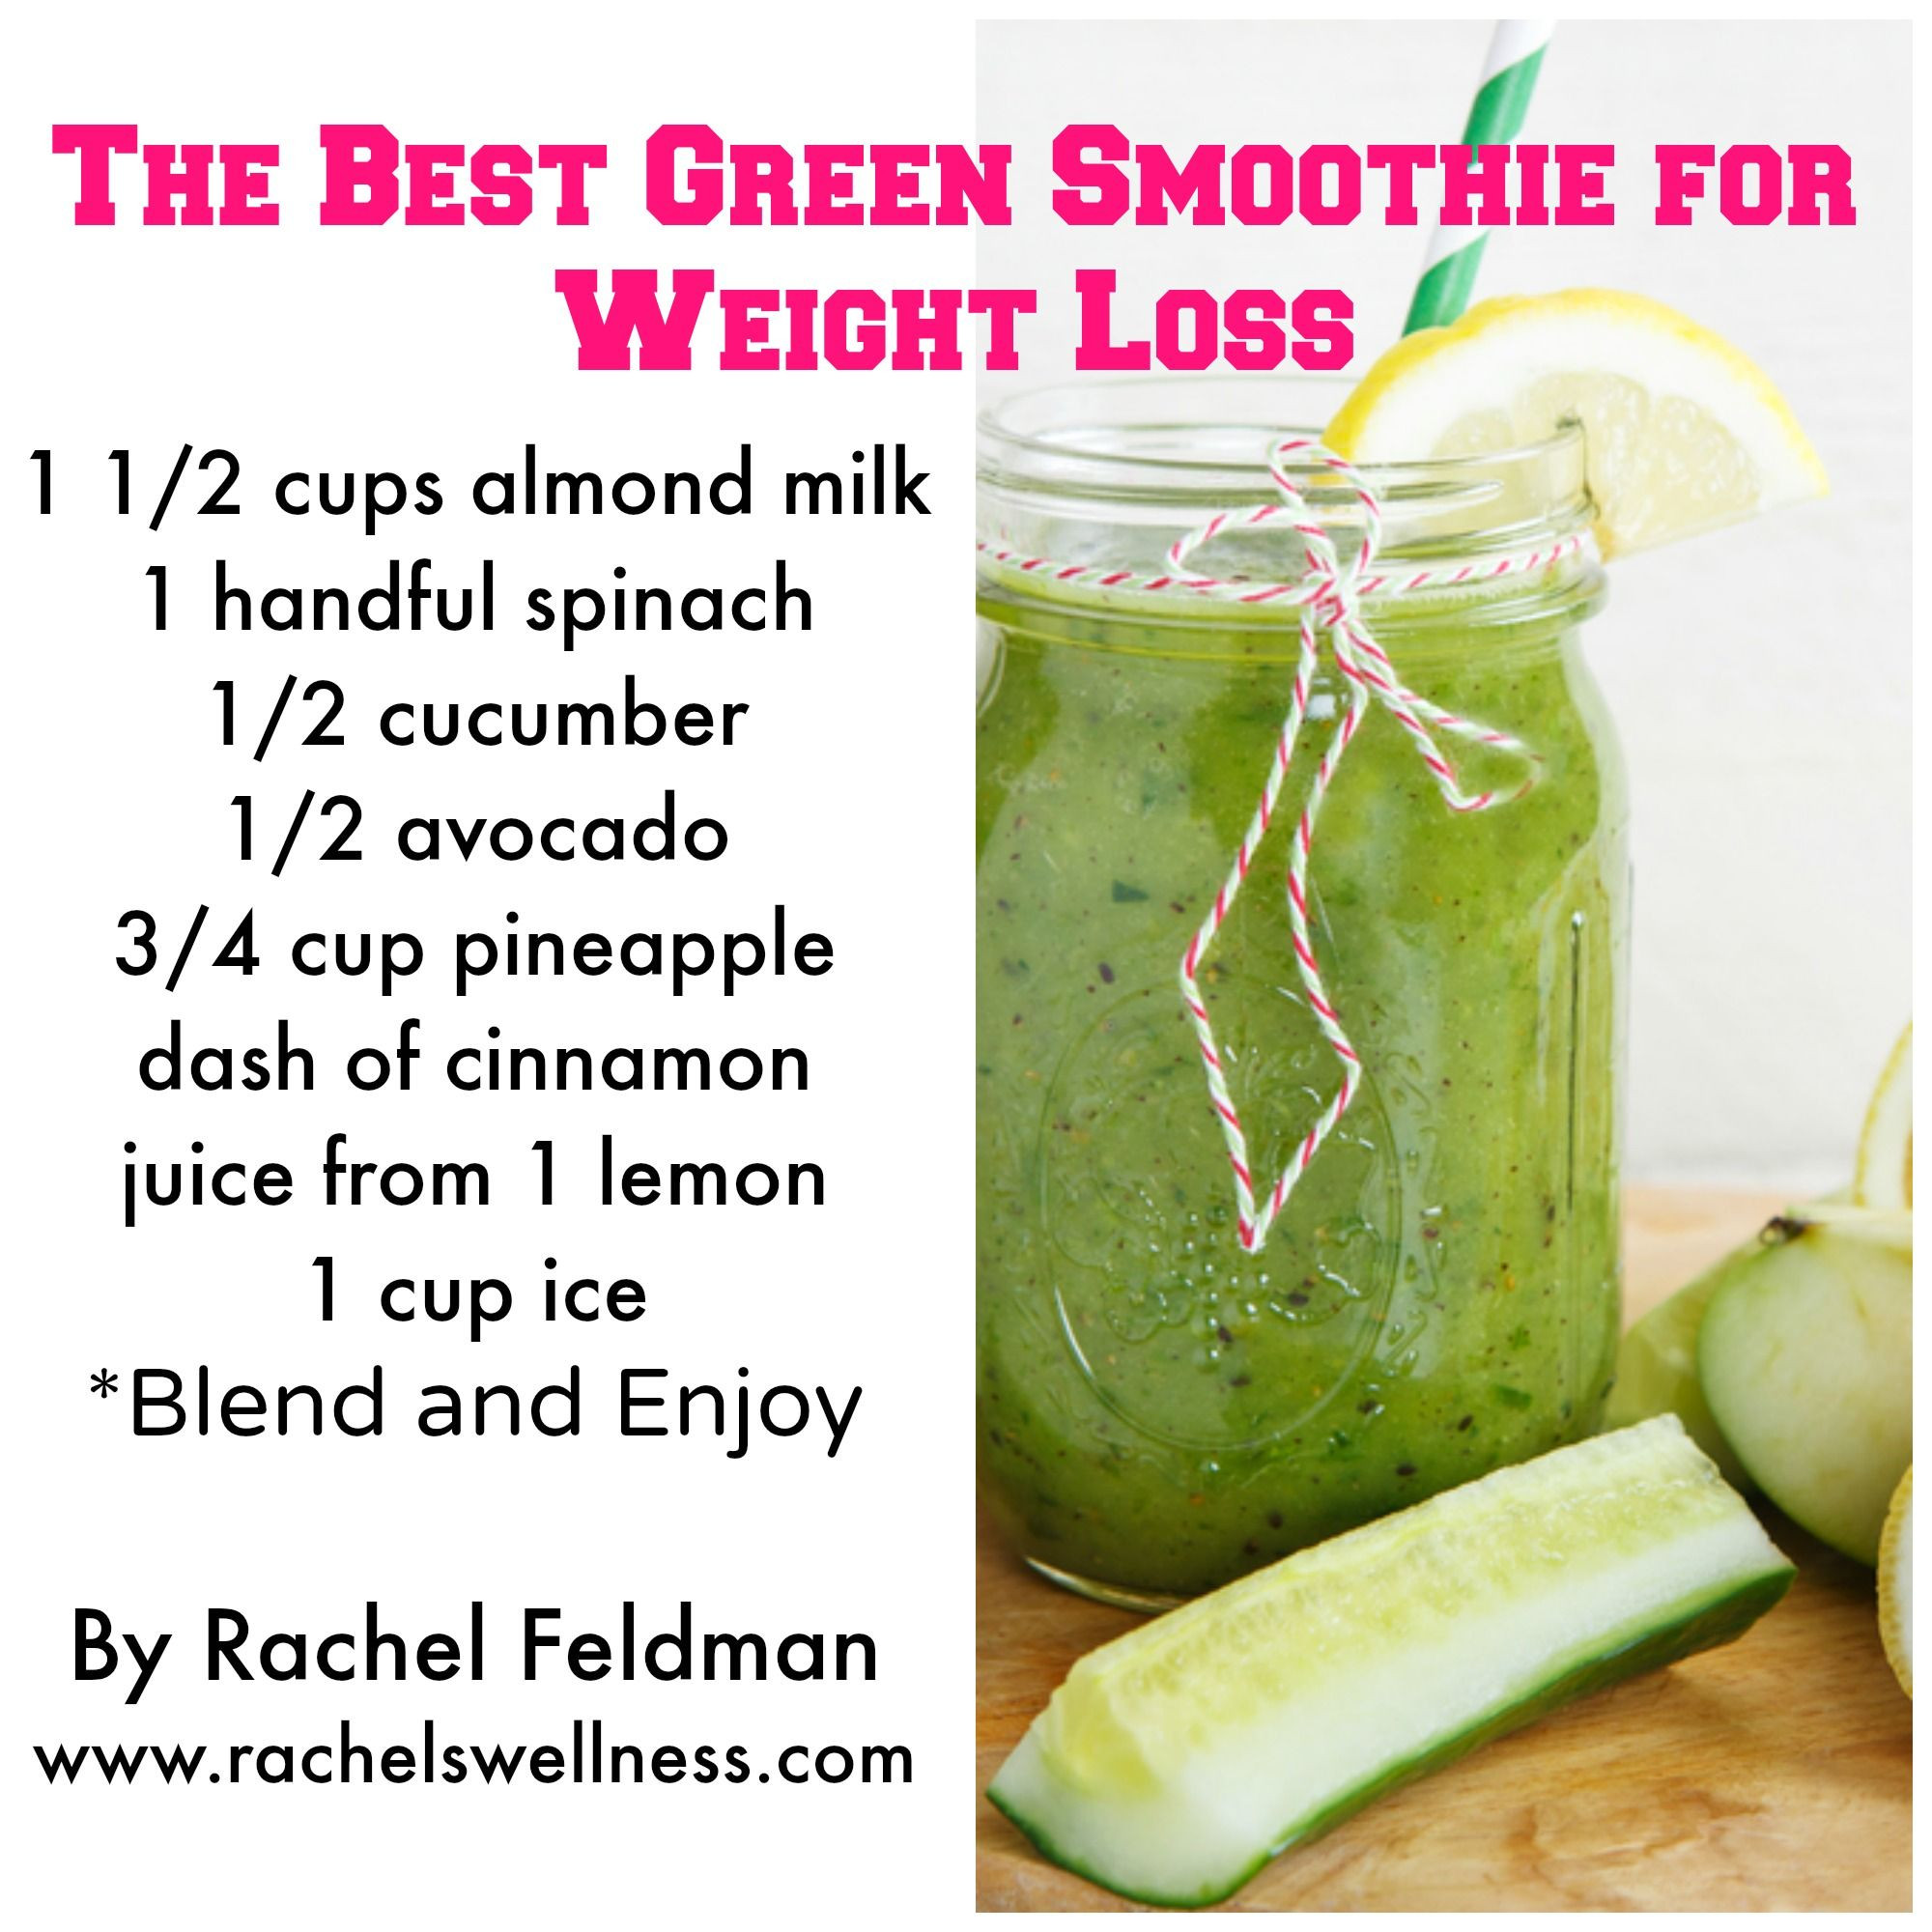 Healthy Green Smoothie Recipes For Weight Loss
 7 Healthy Green Smoothie Recipes For Weight Loss